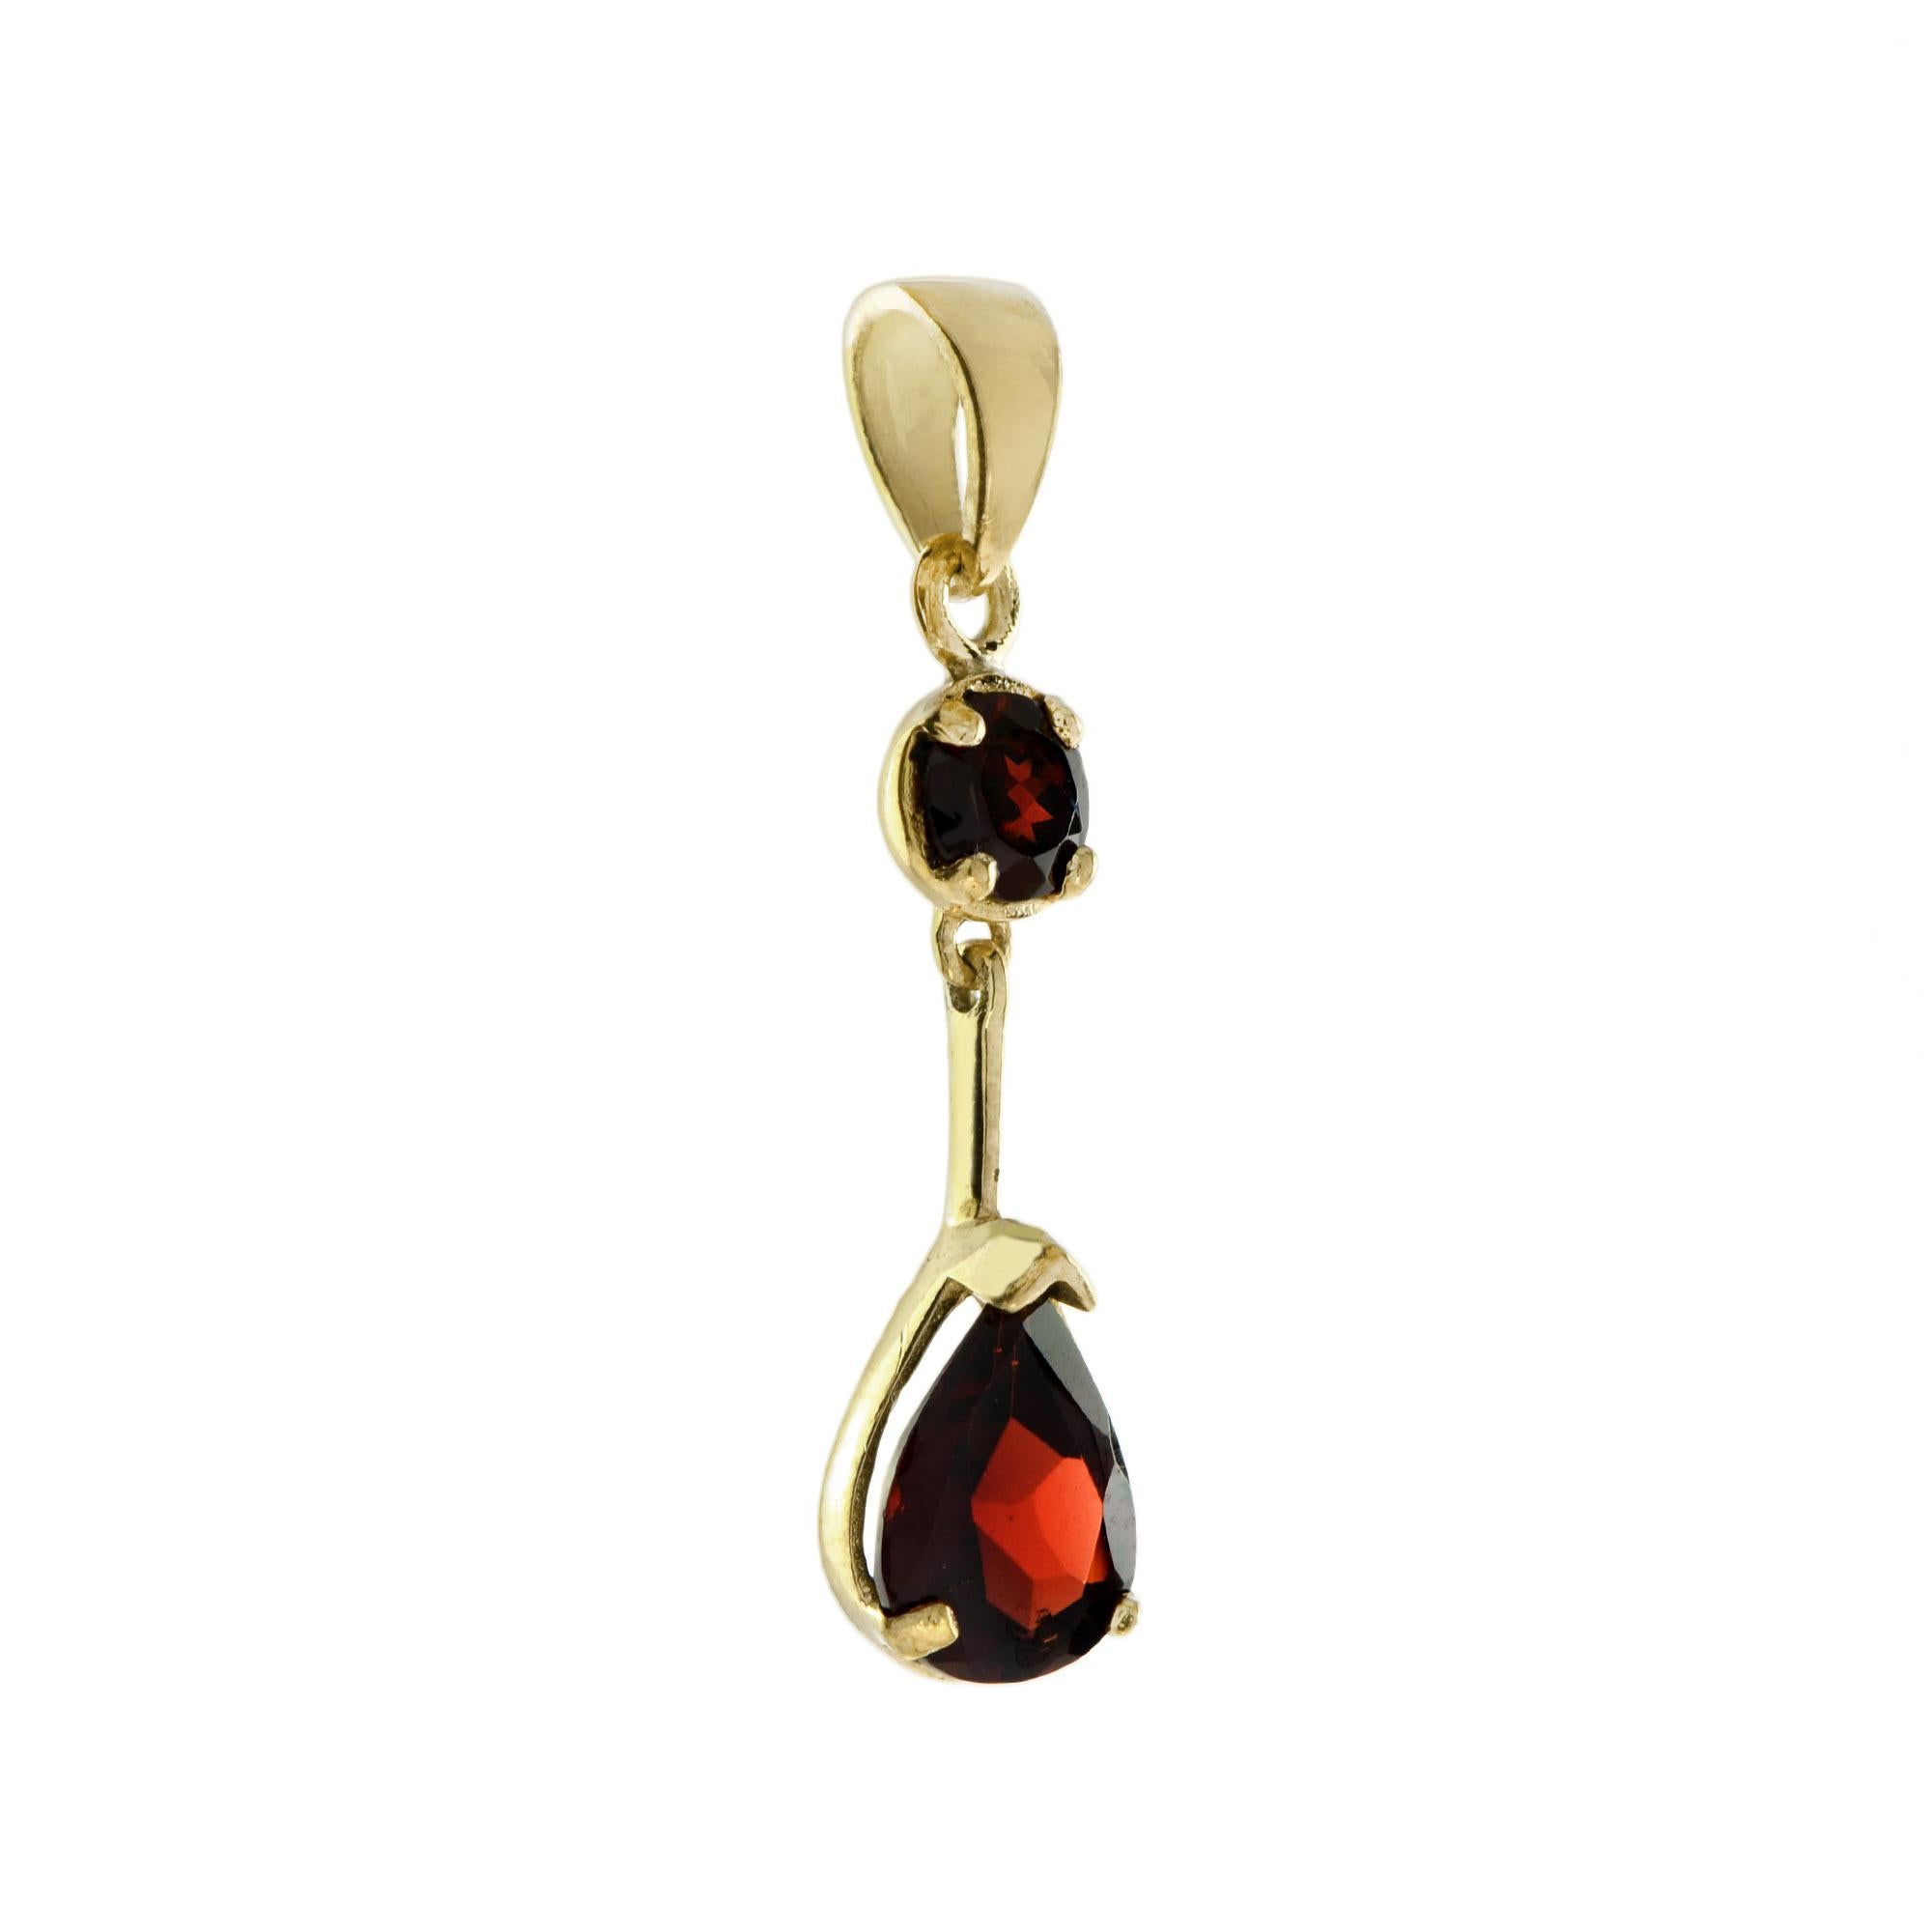 The pendant is a vintage design decorated with deep red pear shape garnet, set in a 14K yellow gold rub-over setting. 

Information
Style: Vintage
Metal: 14K Yellow Gold
Width: 6 mm.
Length: 27 mm.
Weight: 1 g. (approx. in total)

Gemstones 
Type: